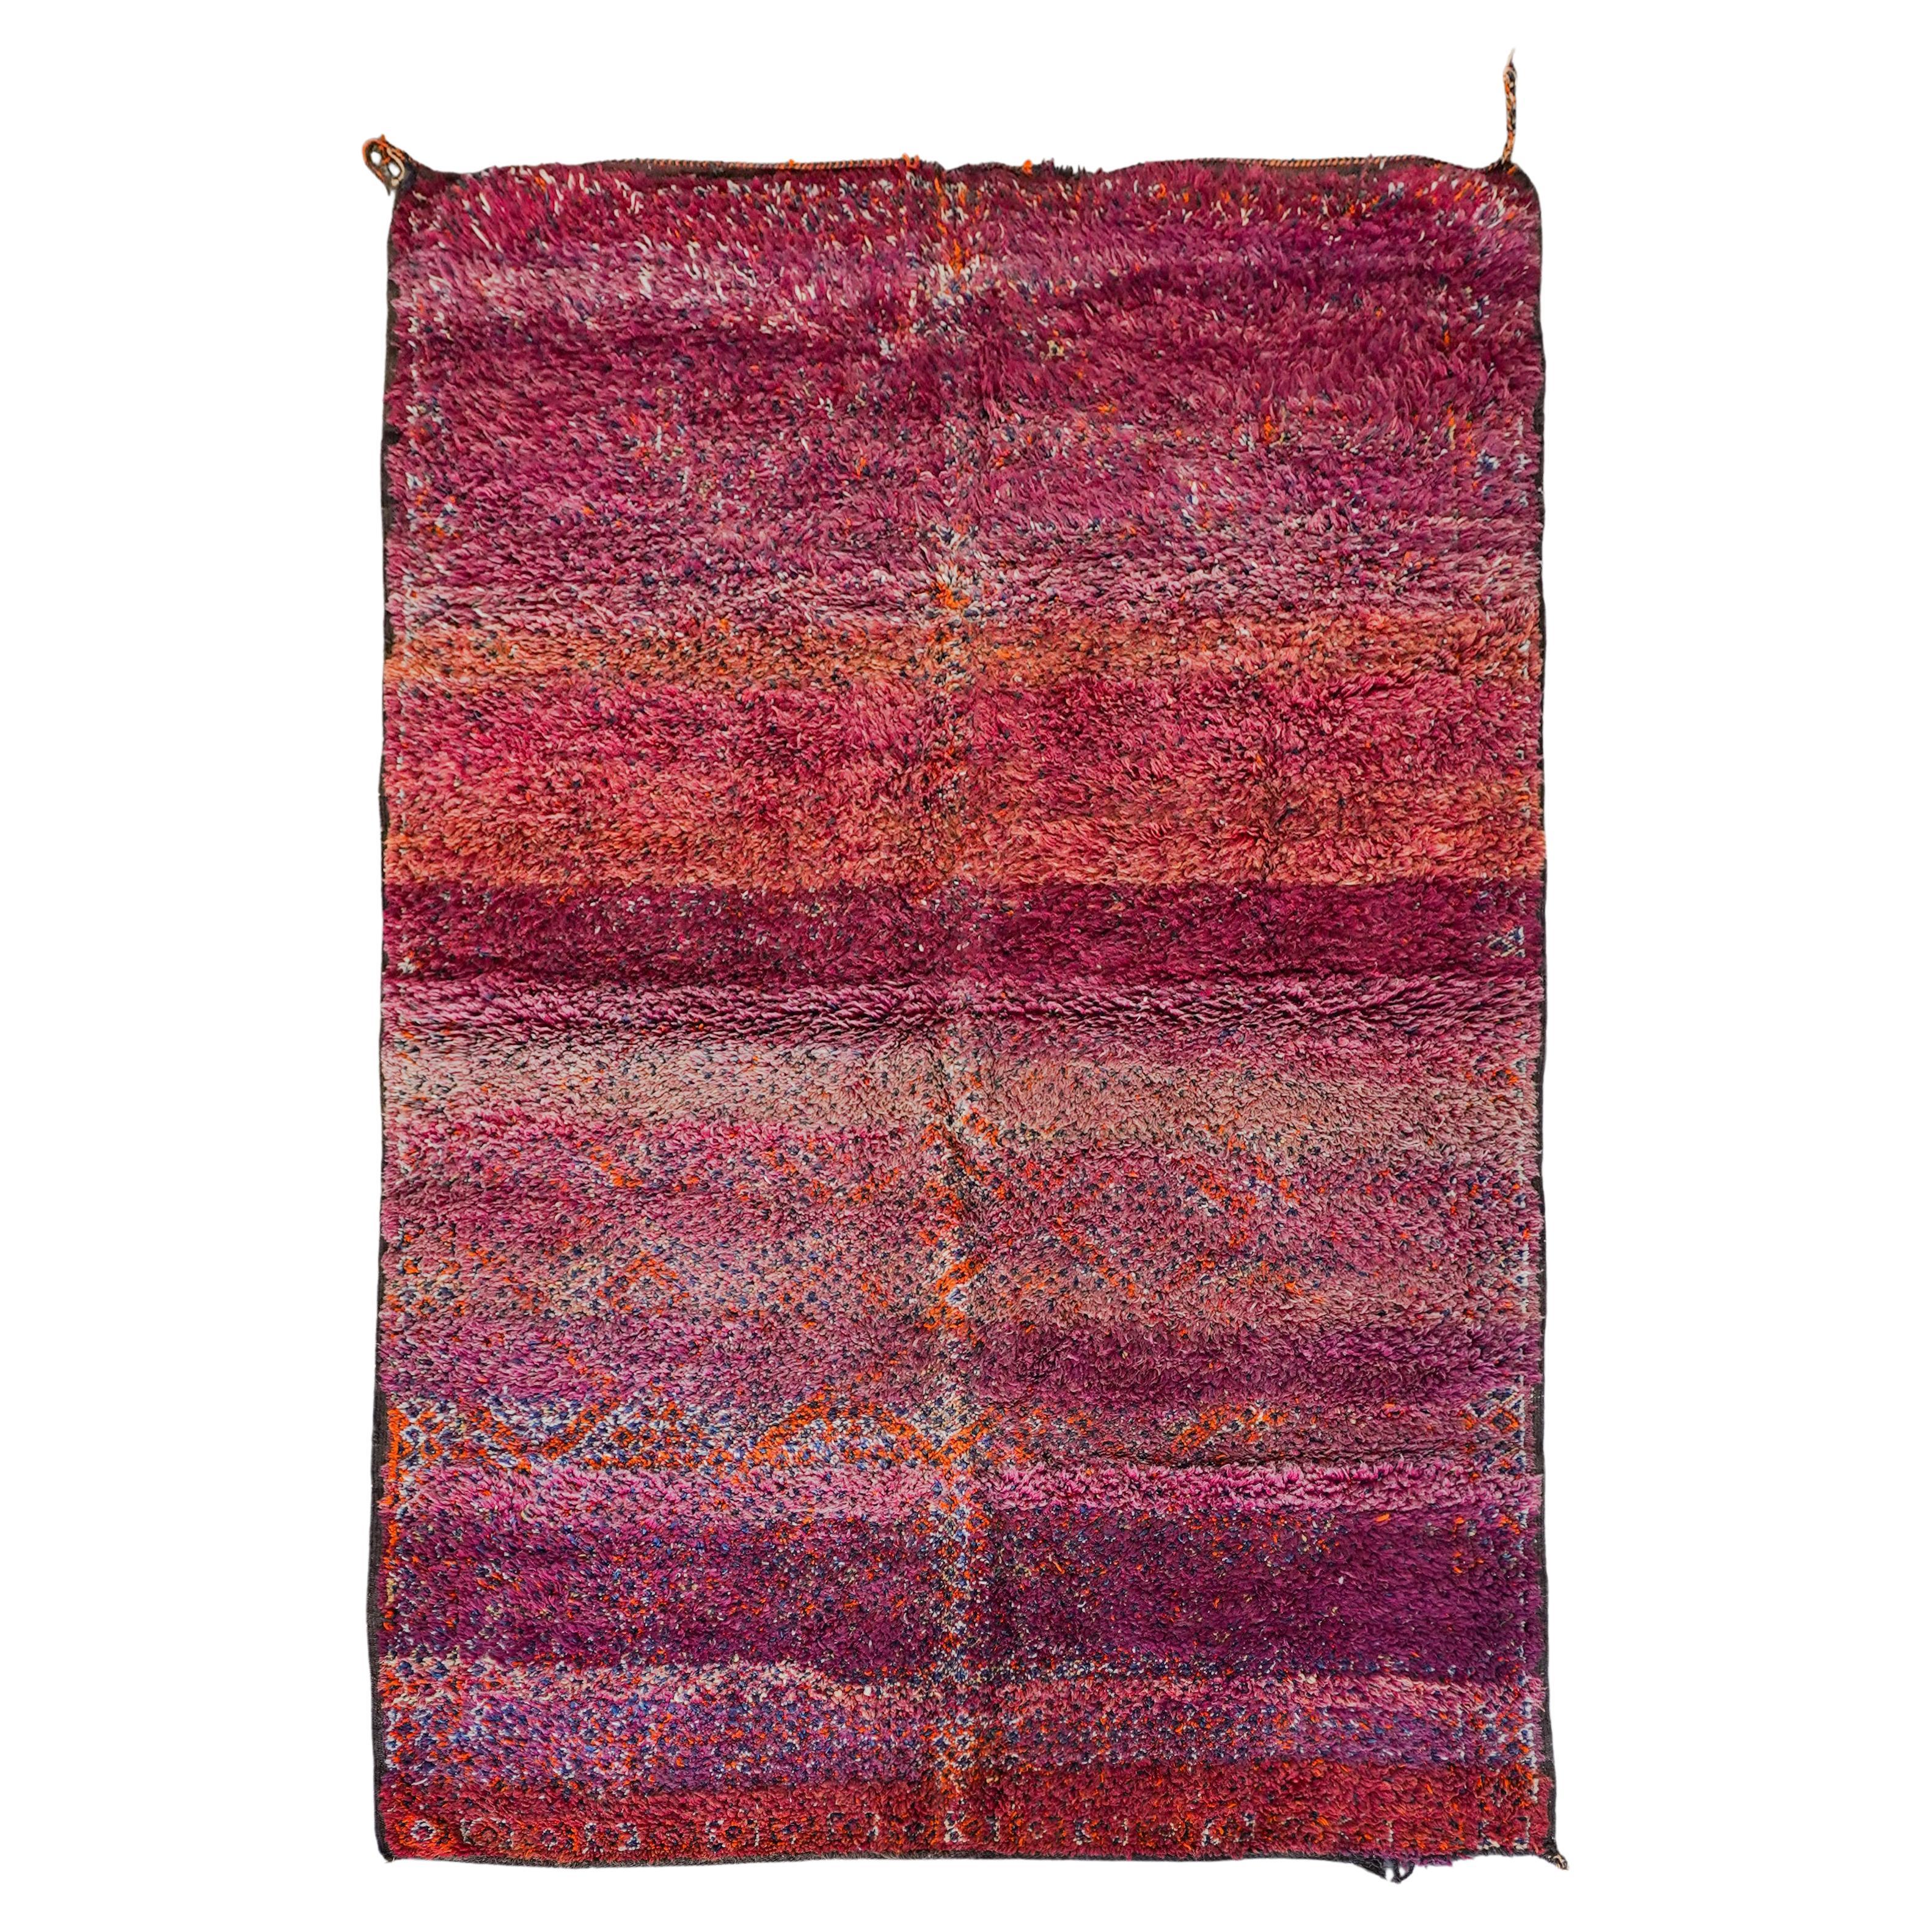 Purple Red Vintage Moroccan Wool Rug from 70s I 6.6 x 12 FT